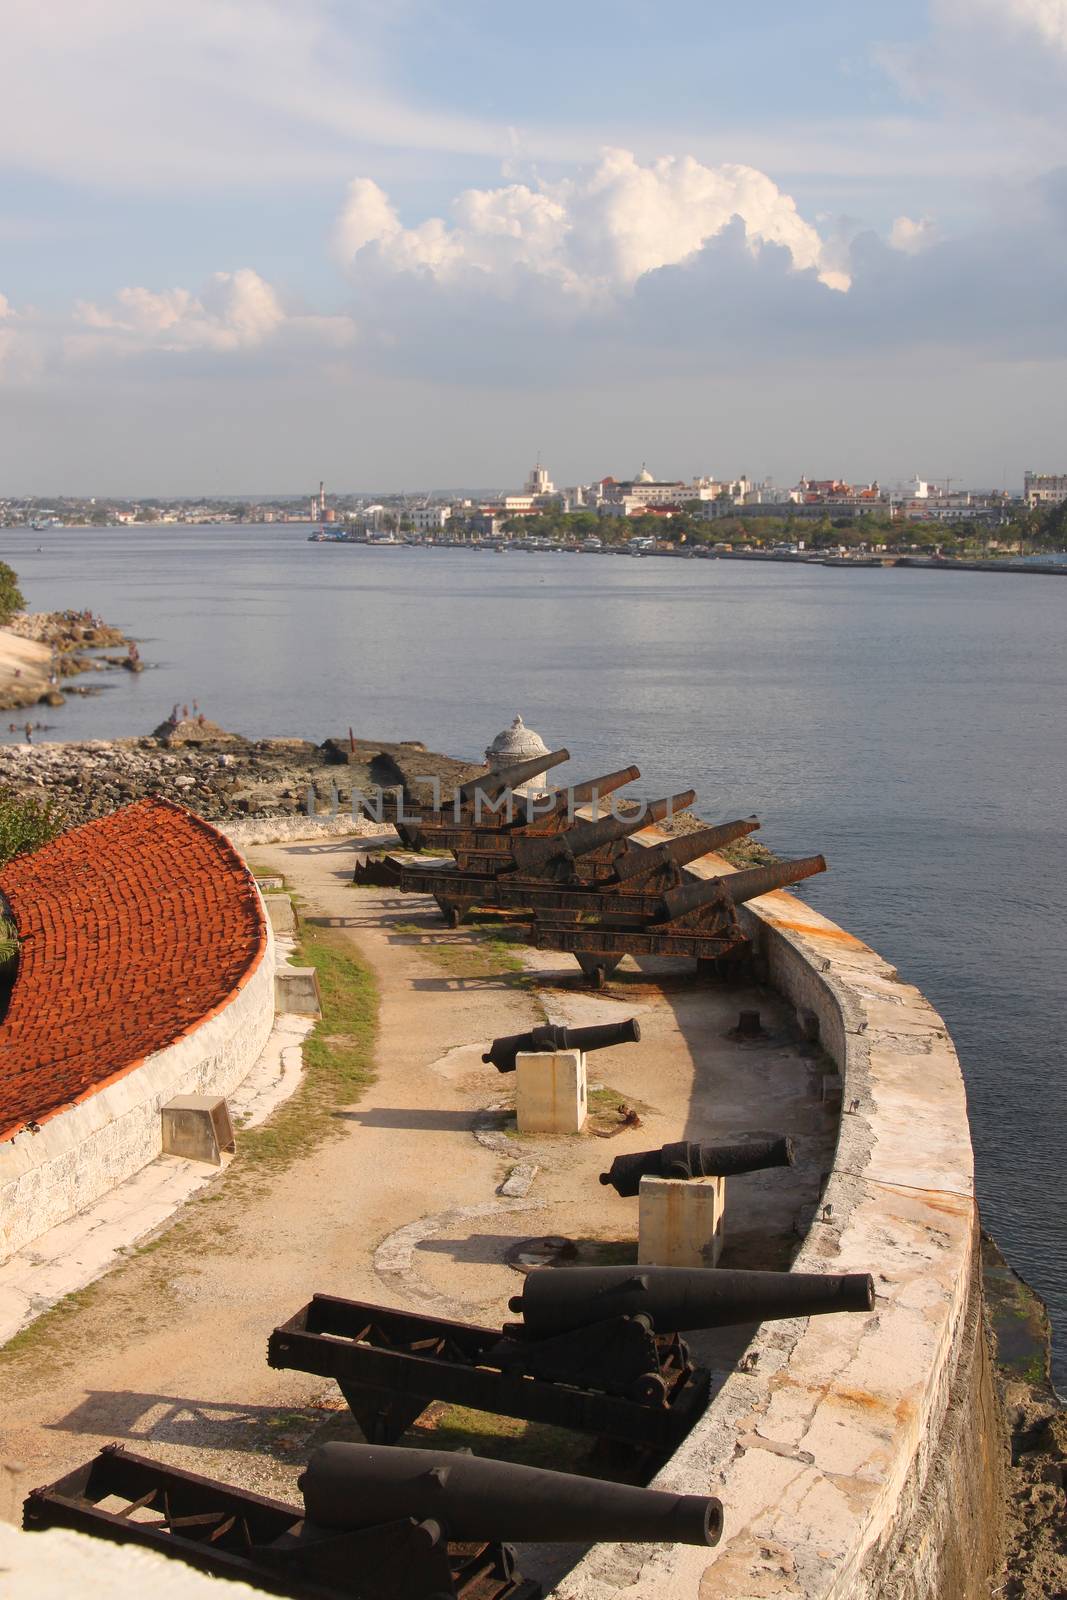 Cannons pointing out to sea from El Morro protecting the harbour entrance of Havana, Cuba